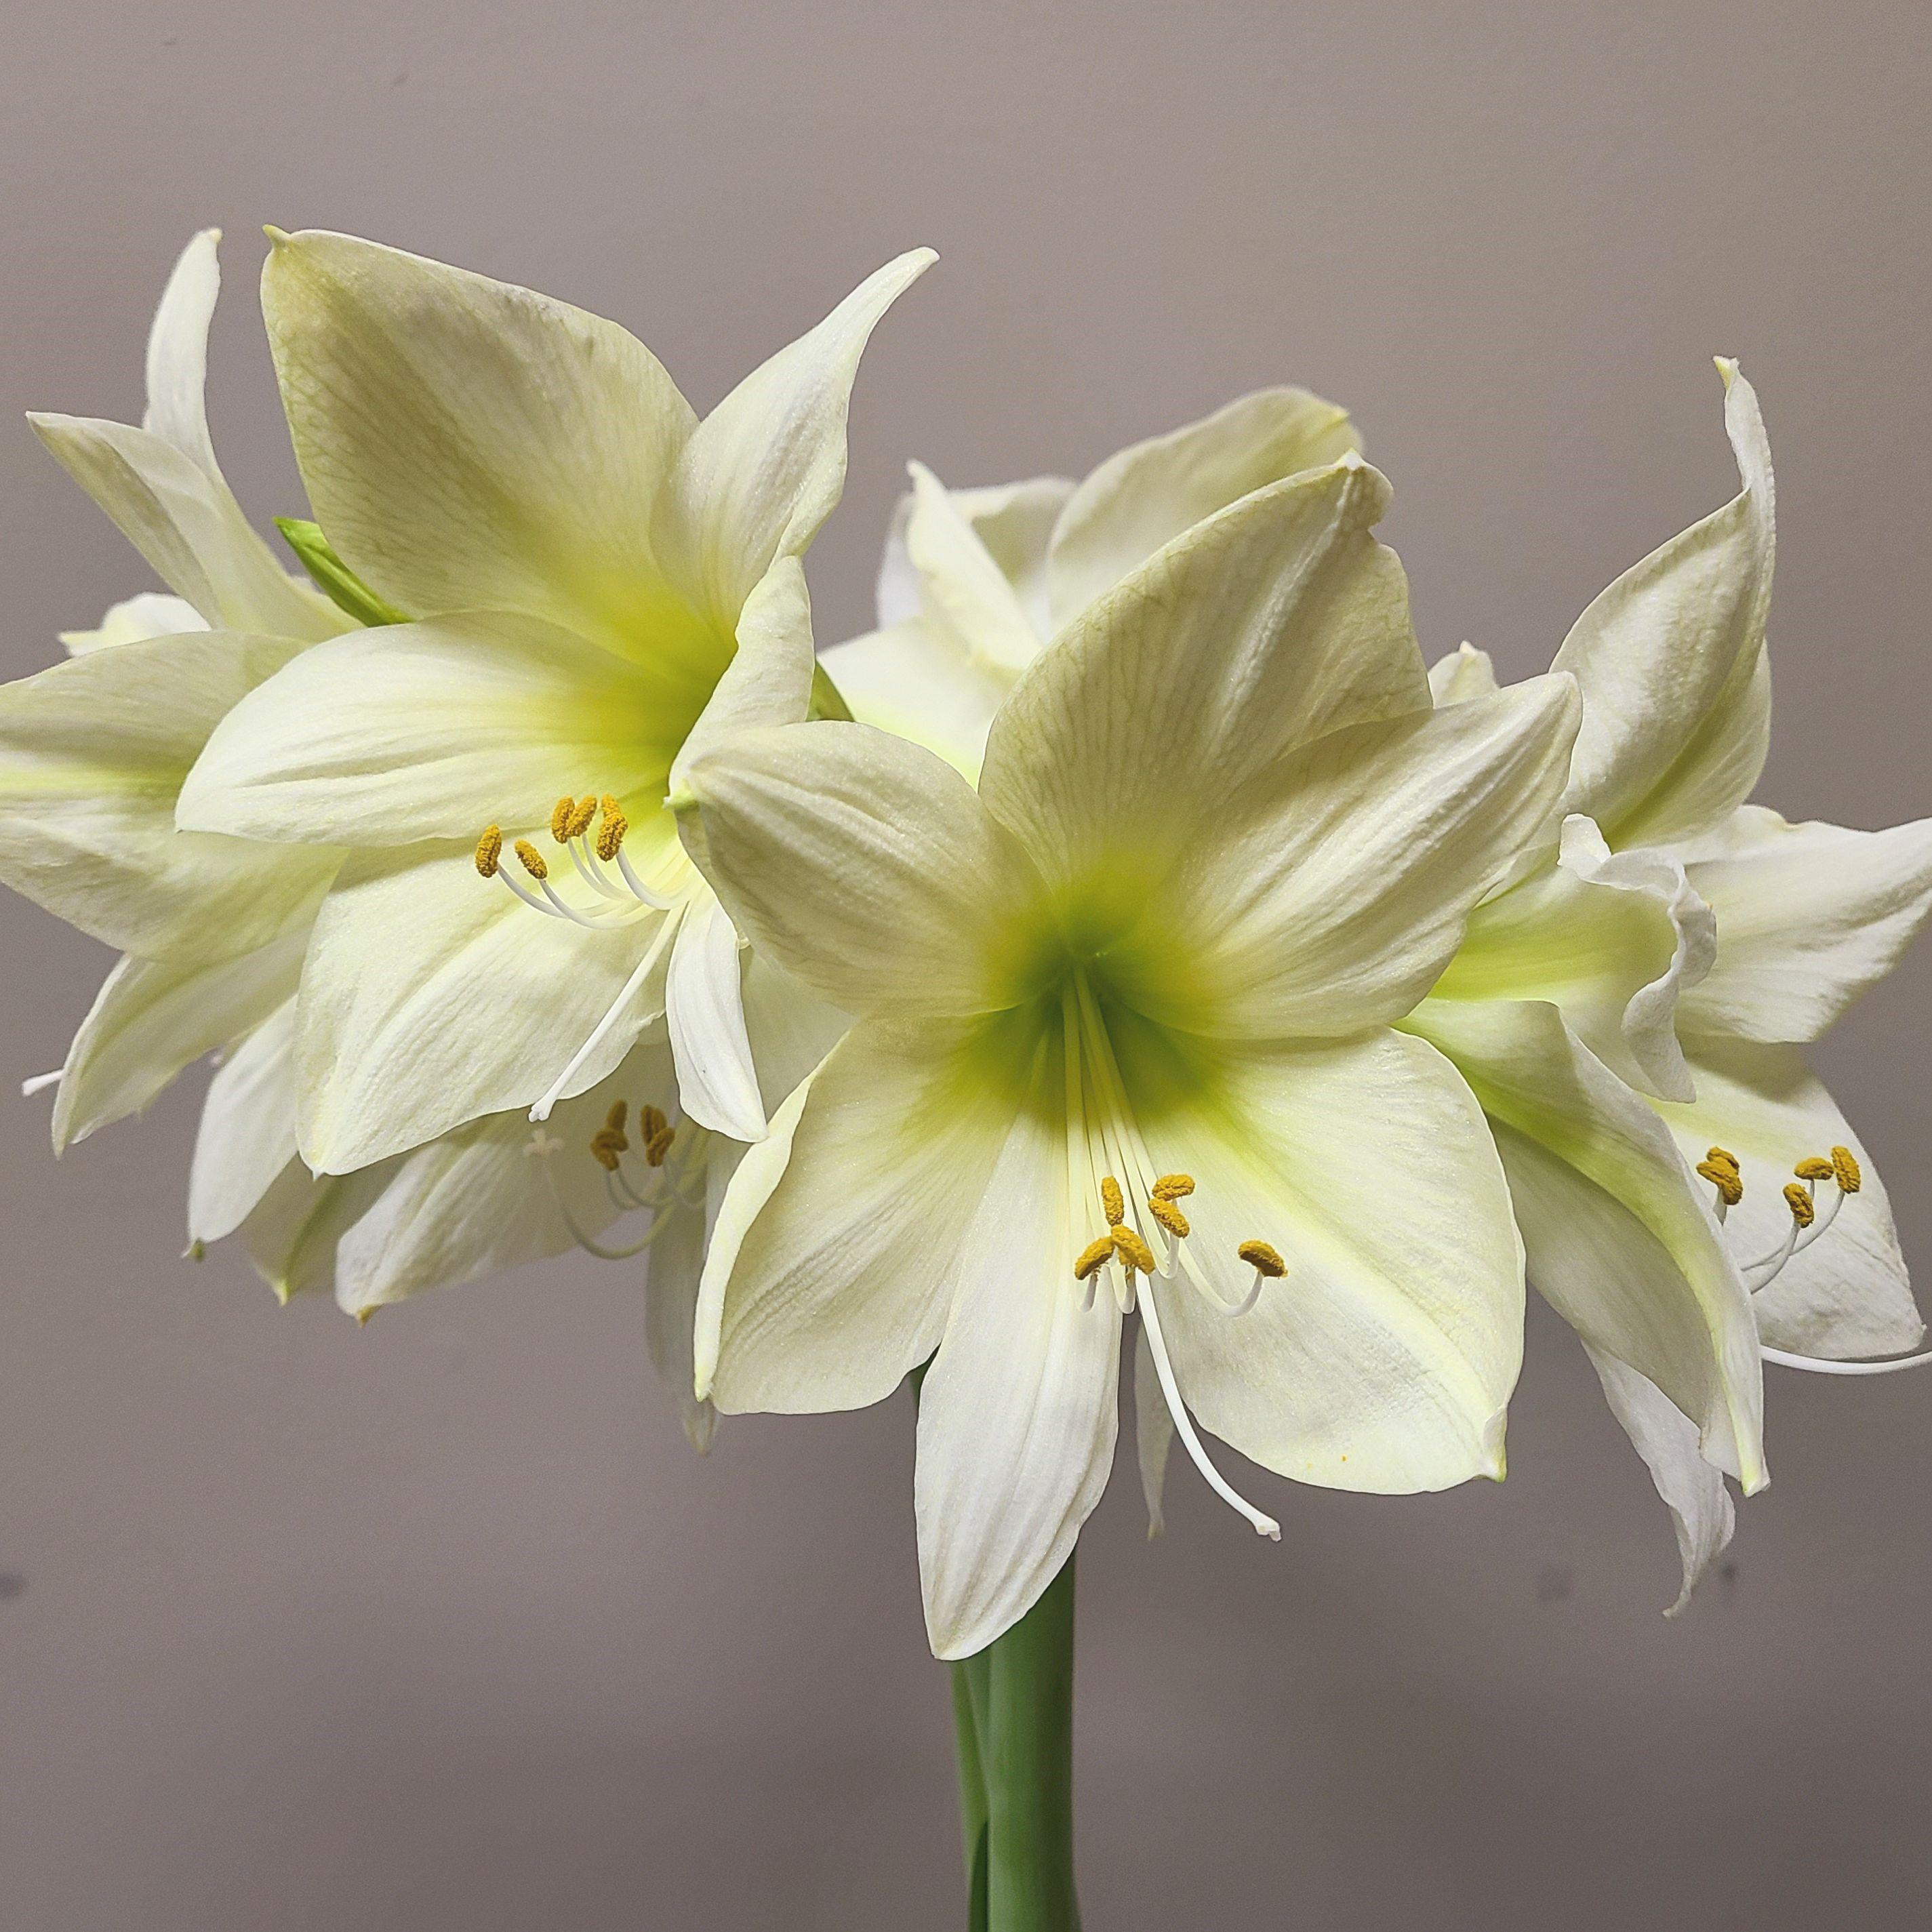 Hippeastrum Southern Hemisphere 'Lemon Star' - Christmas Forcing Amaryllis (Shipping begins Fall 2022) from Leo Berbee Bulb Company